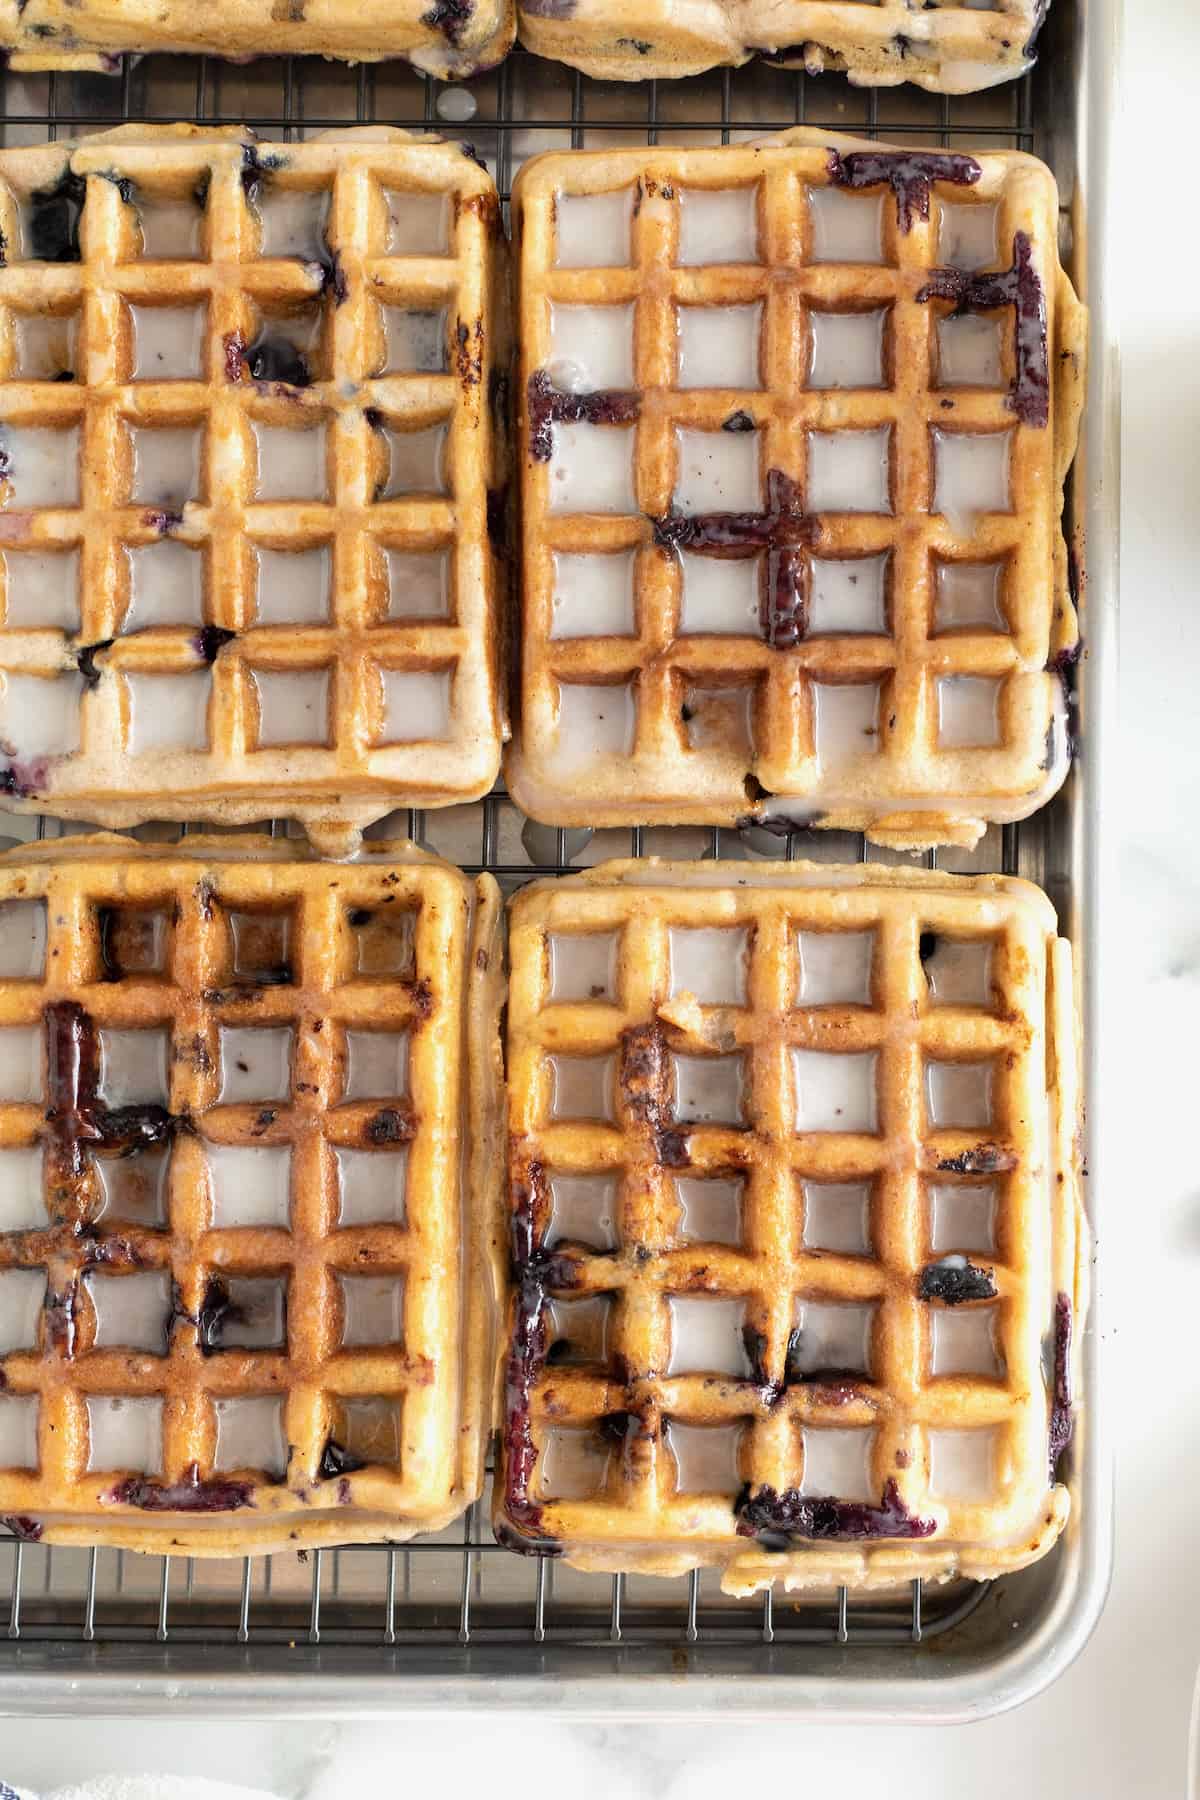 Six blueberry waffles on an aluminum rimmed baking sheet. The waffles have a whiteish purple glaze on them.